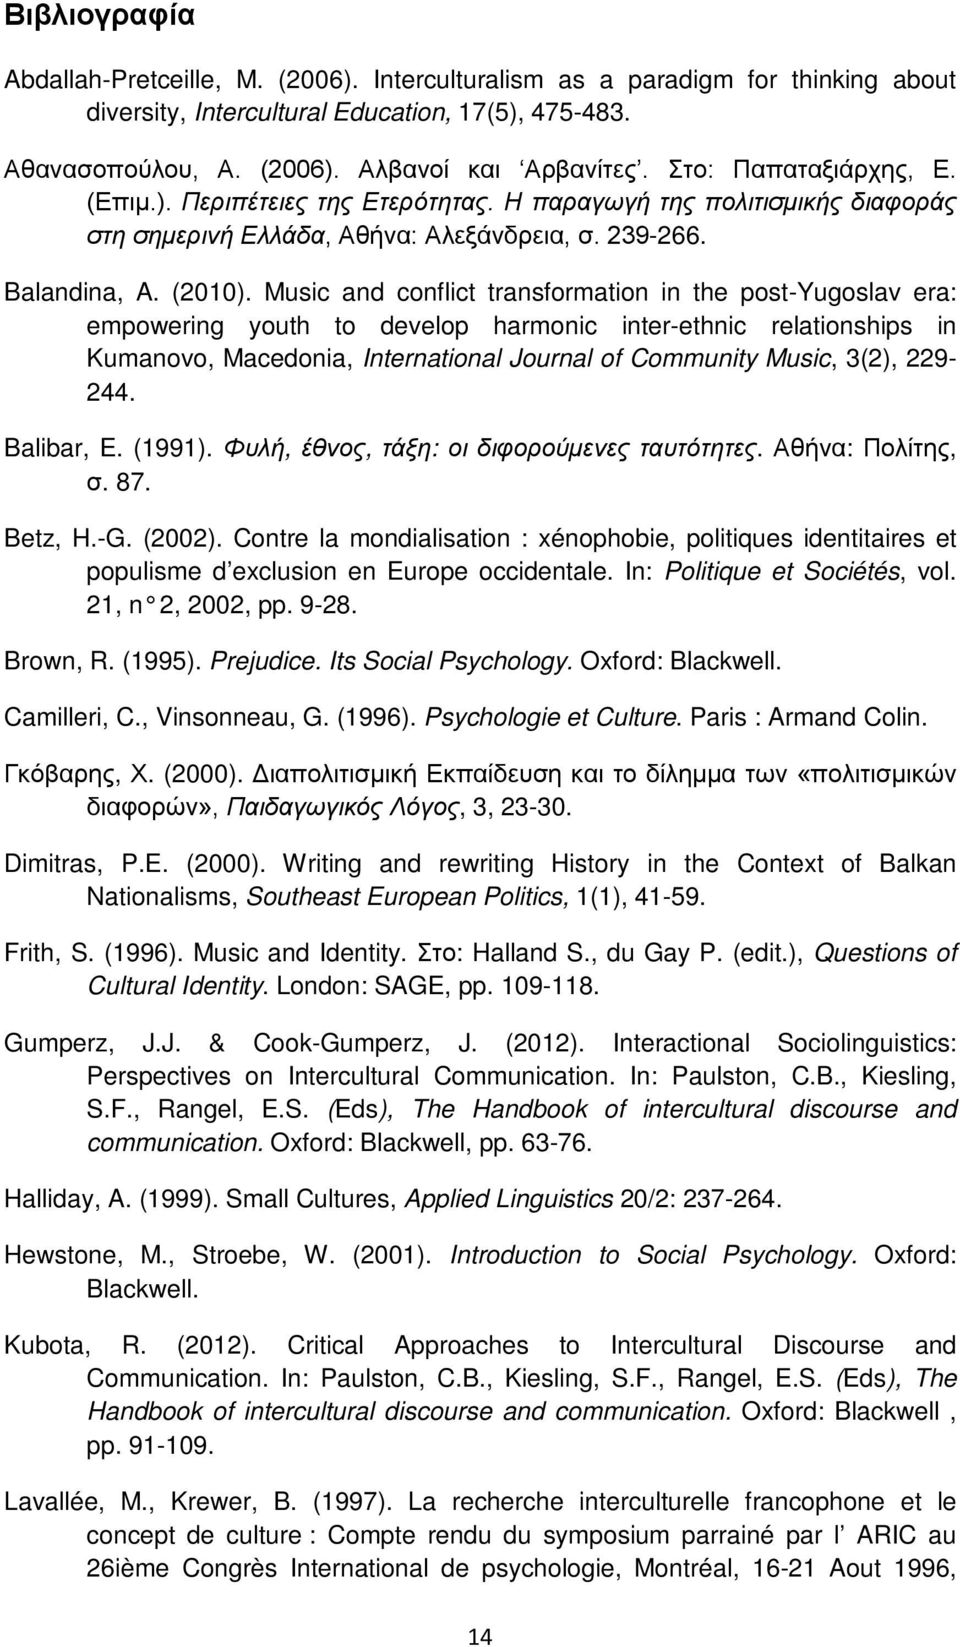 Music and conflict transformation in the post-yugoslav era: empowering youth to develop harmonic inter-ethnic relationships in Kumanovo, Macedonia, International Journal of Community Music, 3(2),